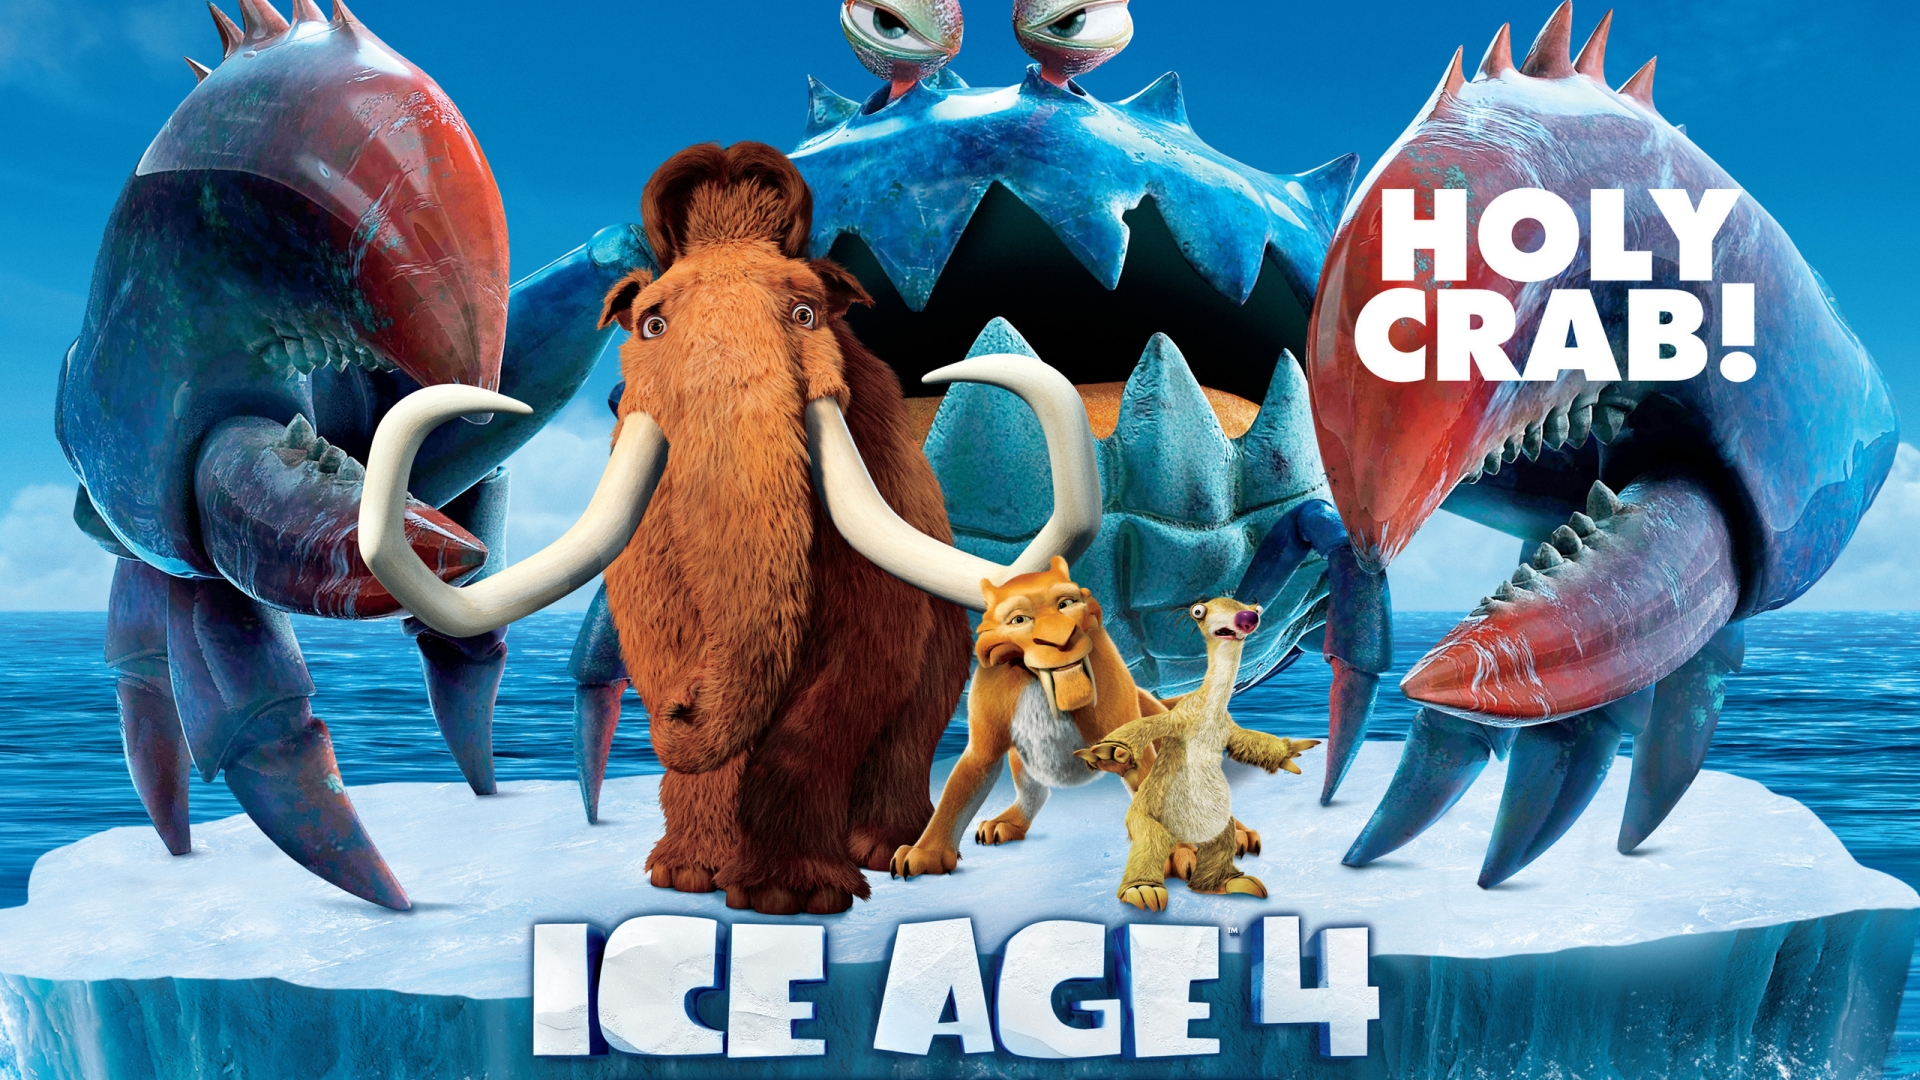 Ice Age 4 Holy Crab for 1920 x 1080 HDTV 1080p resolution